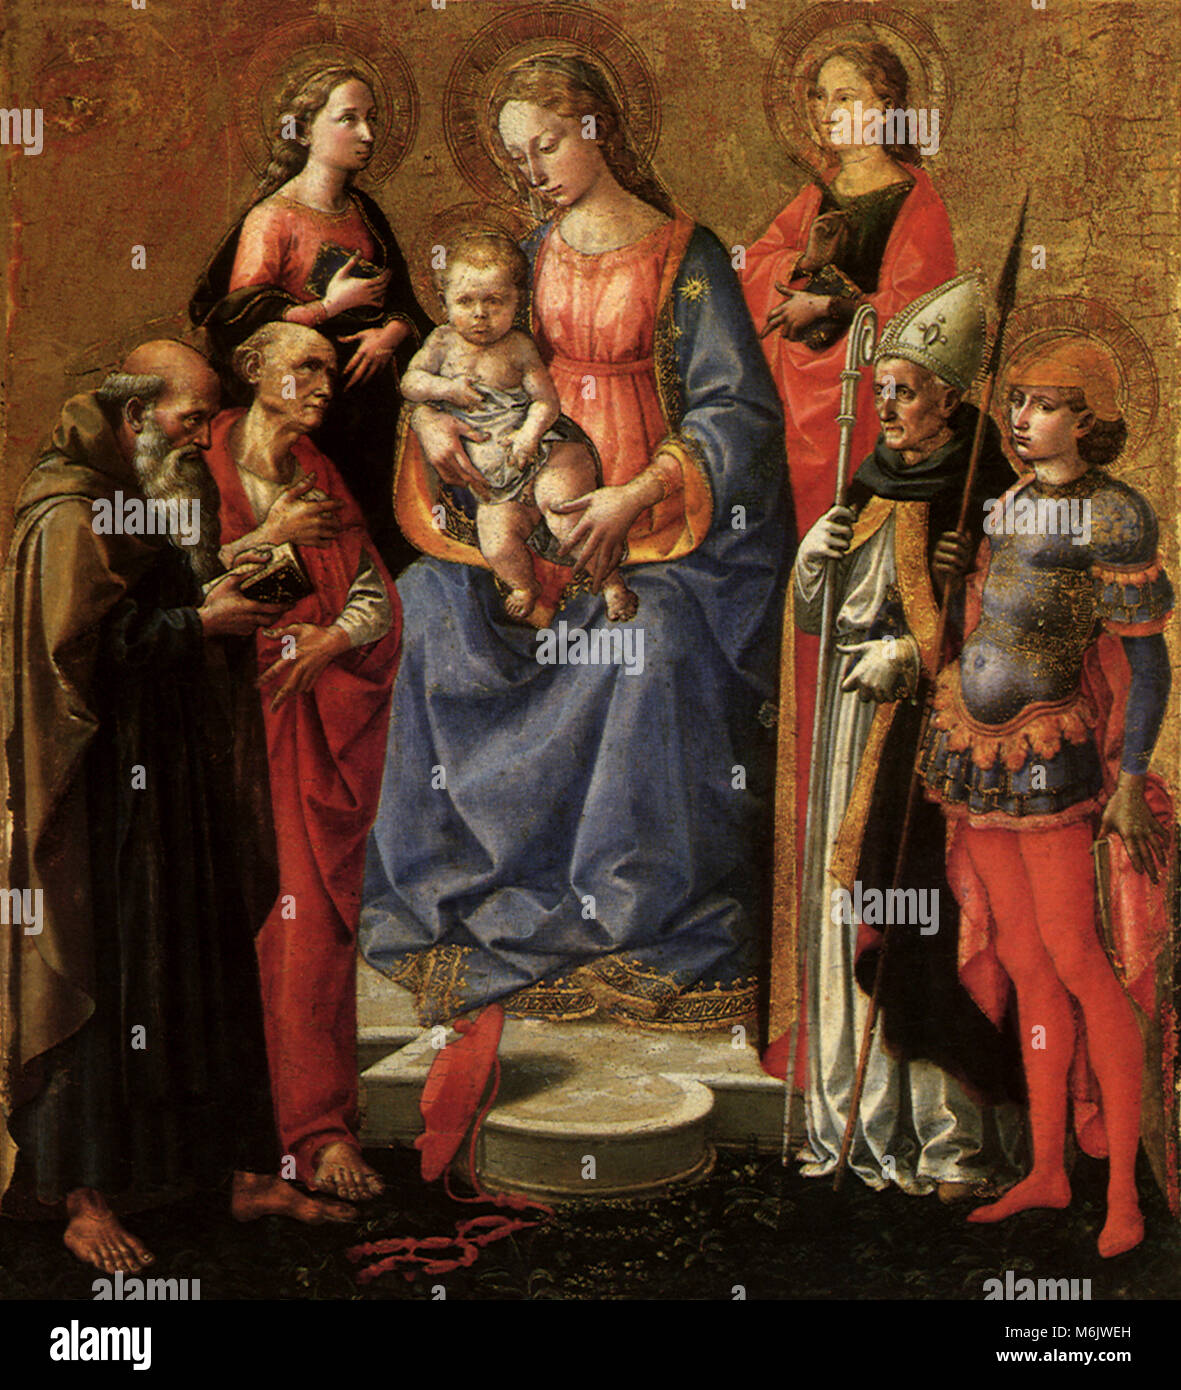 Virgin and Child with Six Saints, Pesellino, Francesco di Stefan, 1450. Stock Photo